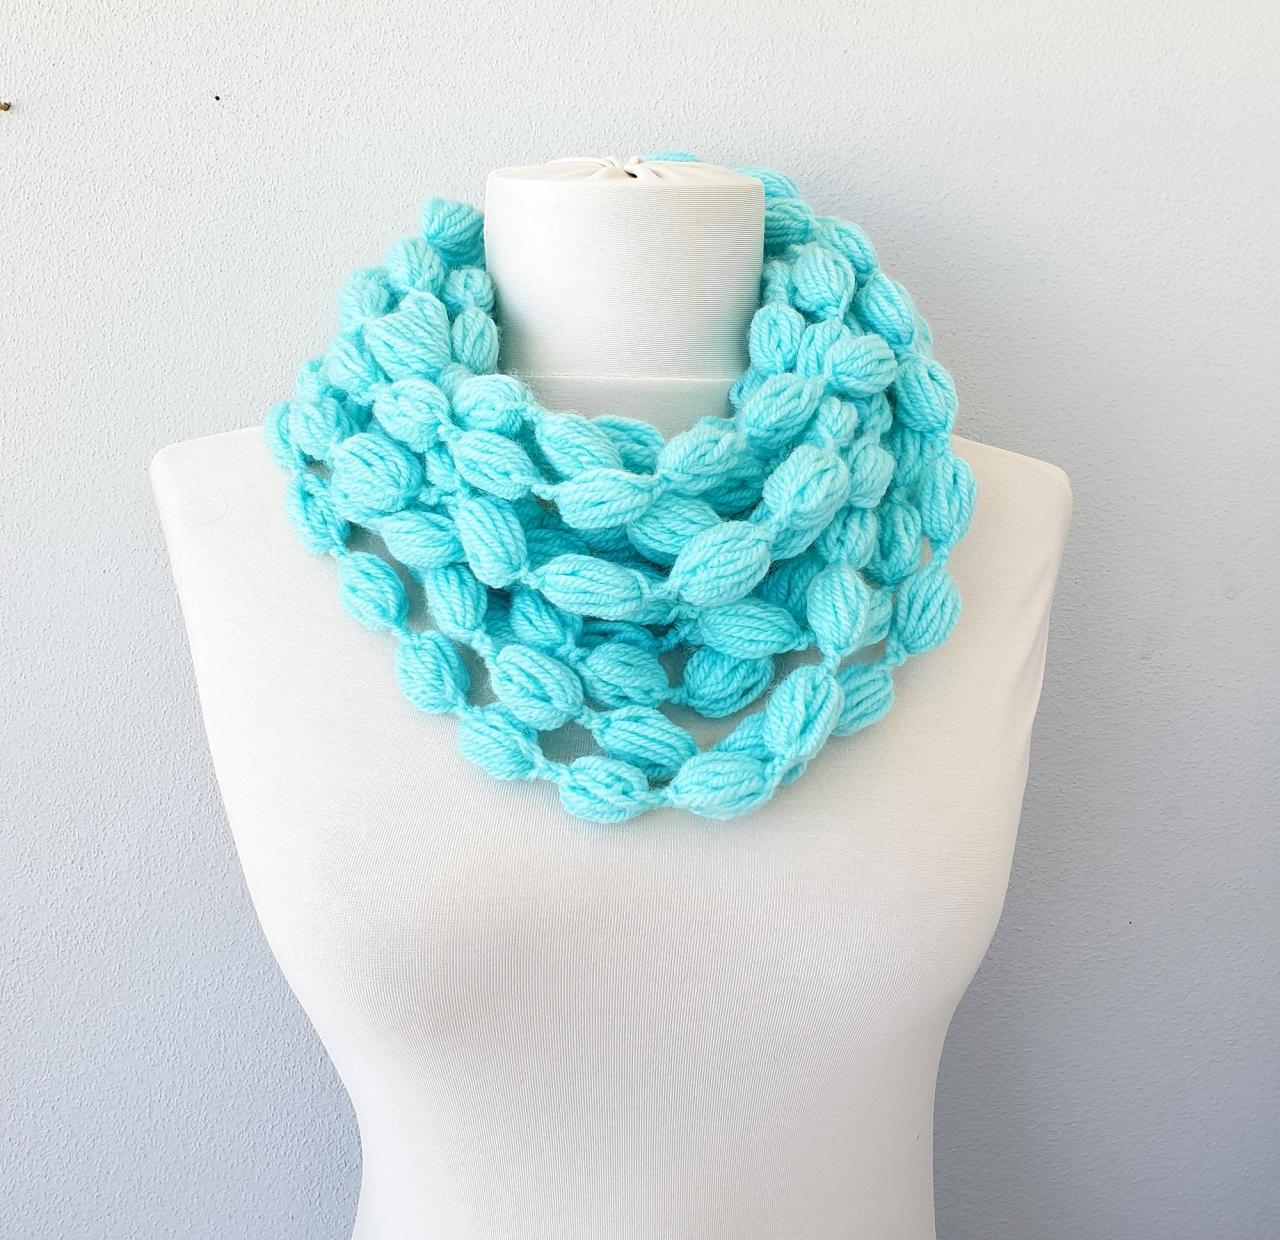 Aqua Blue Crochet Scarf, Chain Scarf Necklace, Scarves For Women, Gift For Her, Christmas Stocking Stuffer